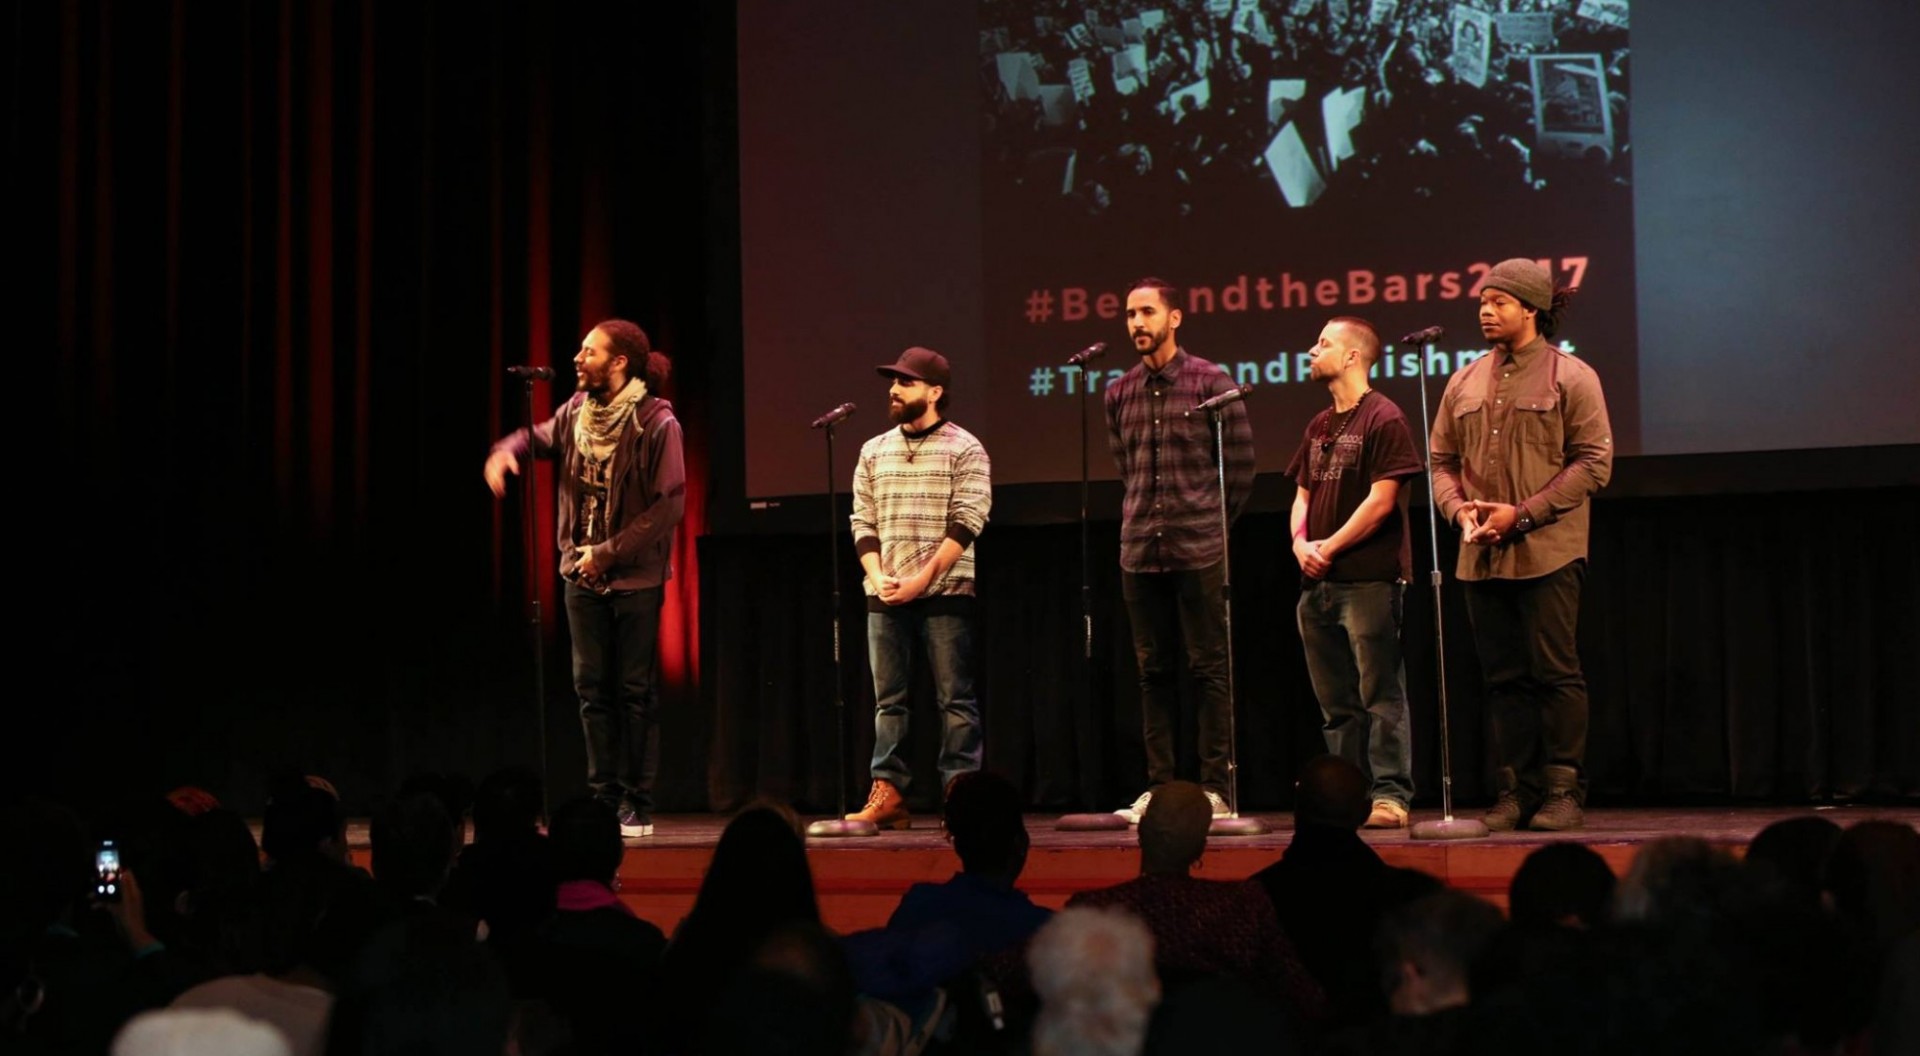 Justice Poets performing at Beyond the Bars Conference